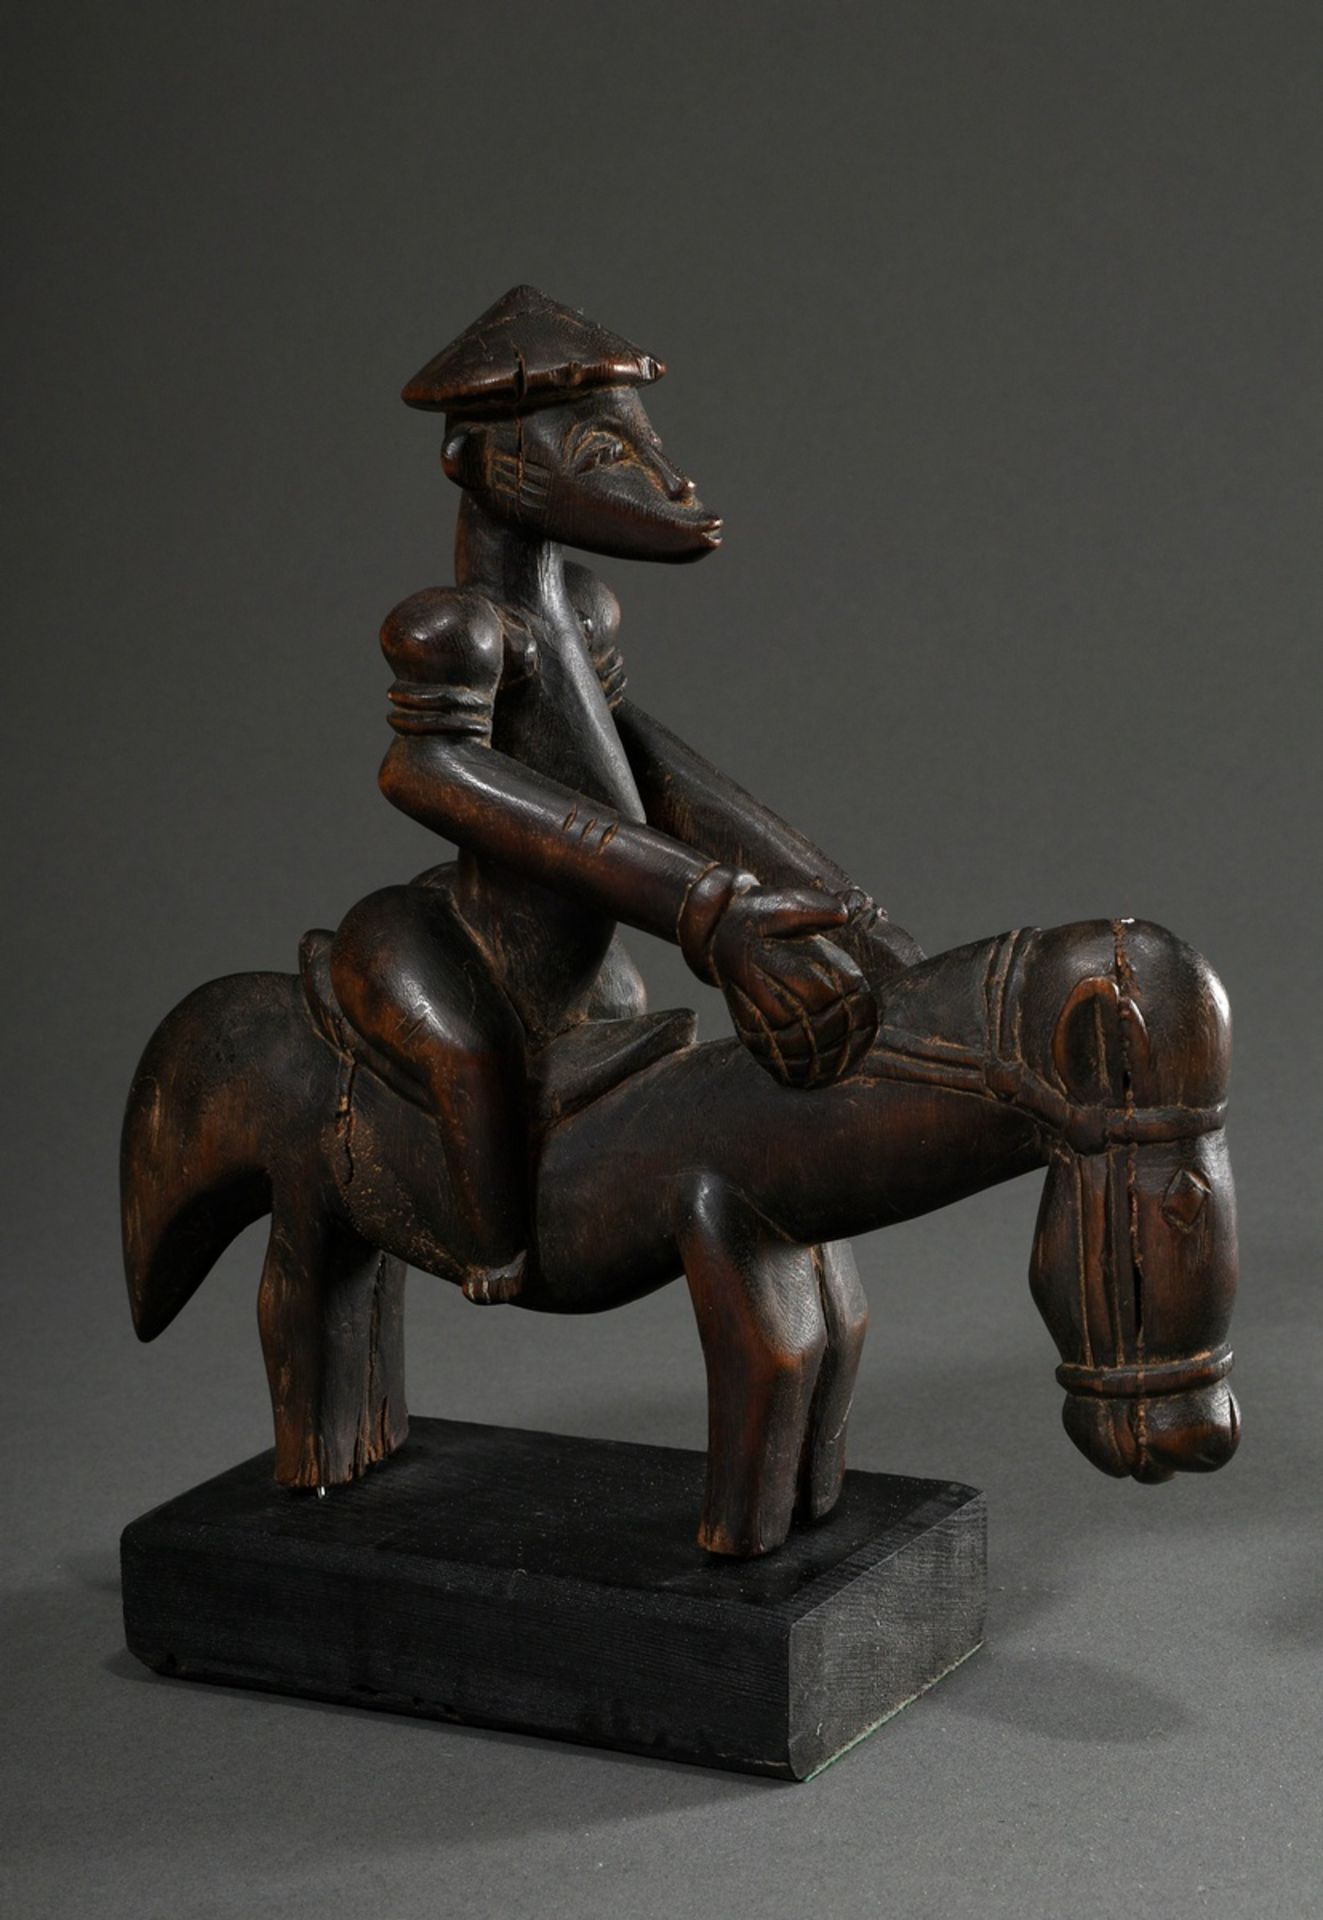 Equestrian statuette of a muscular figure with pointed headgear and scarification marks on the body - Image 2 of 3